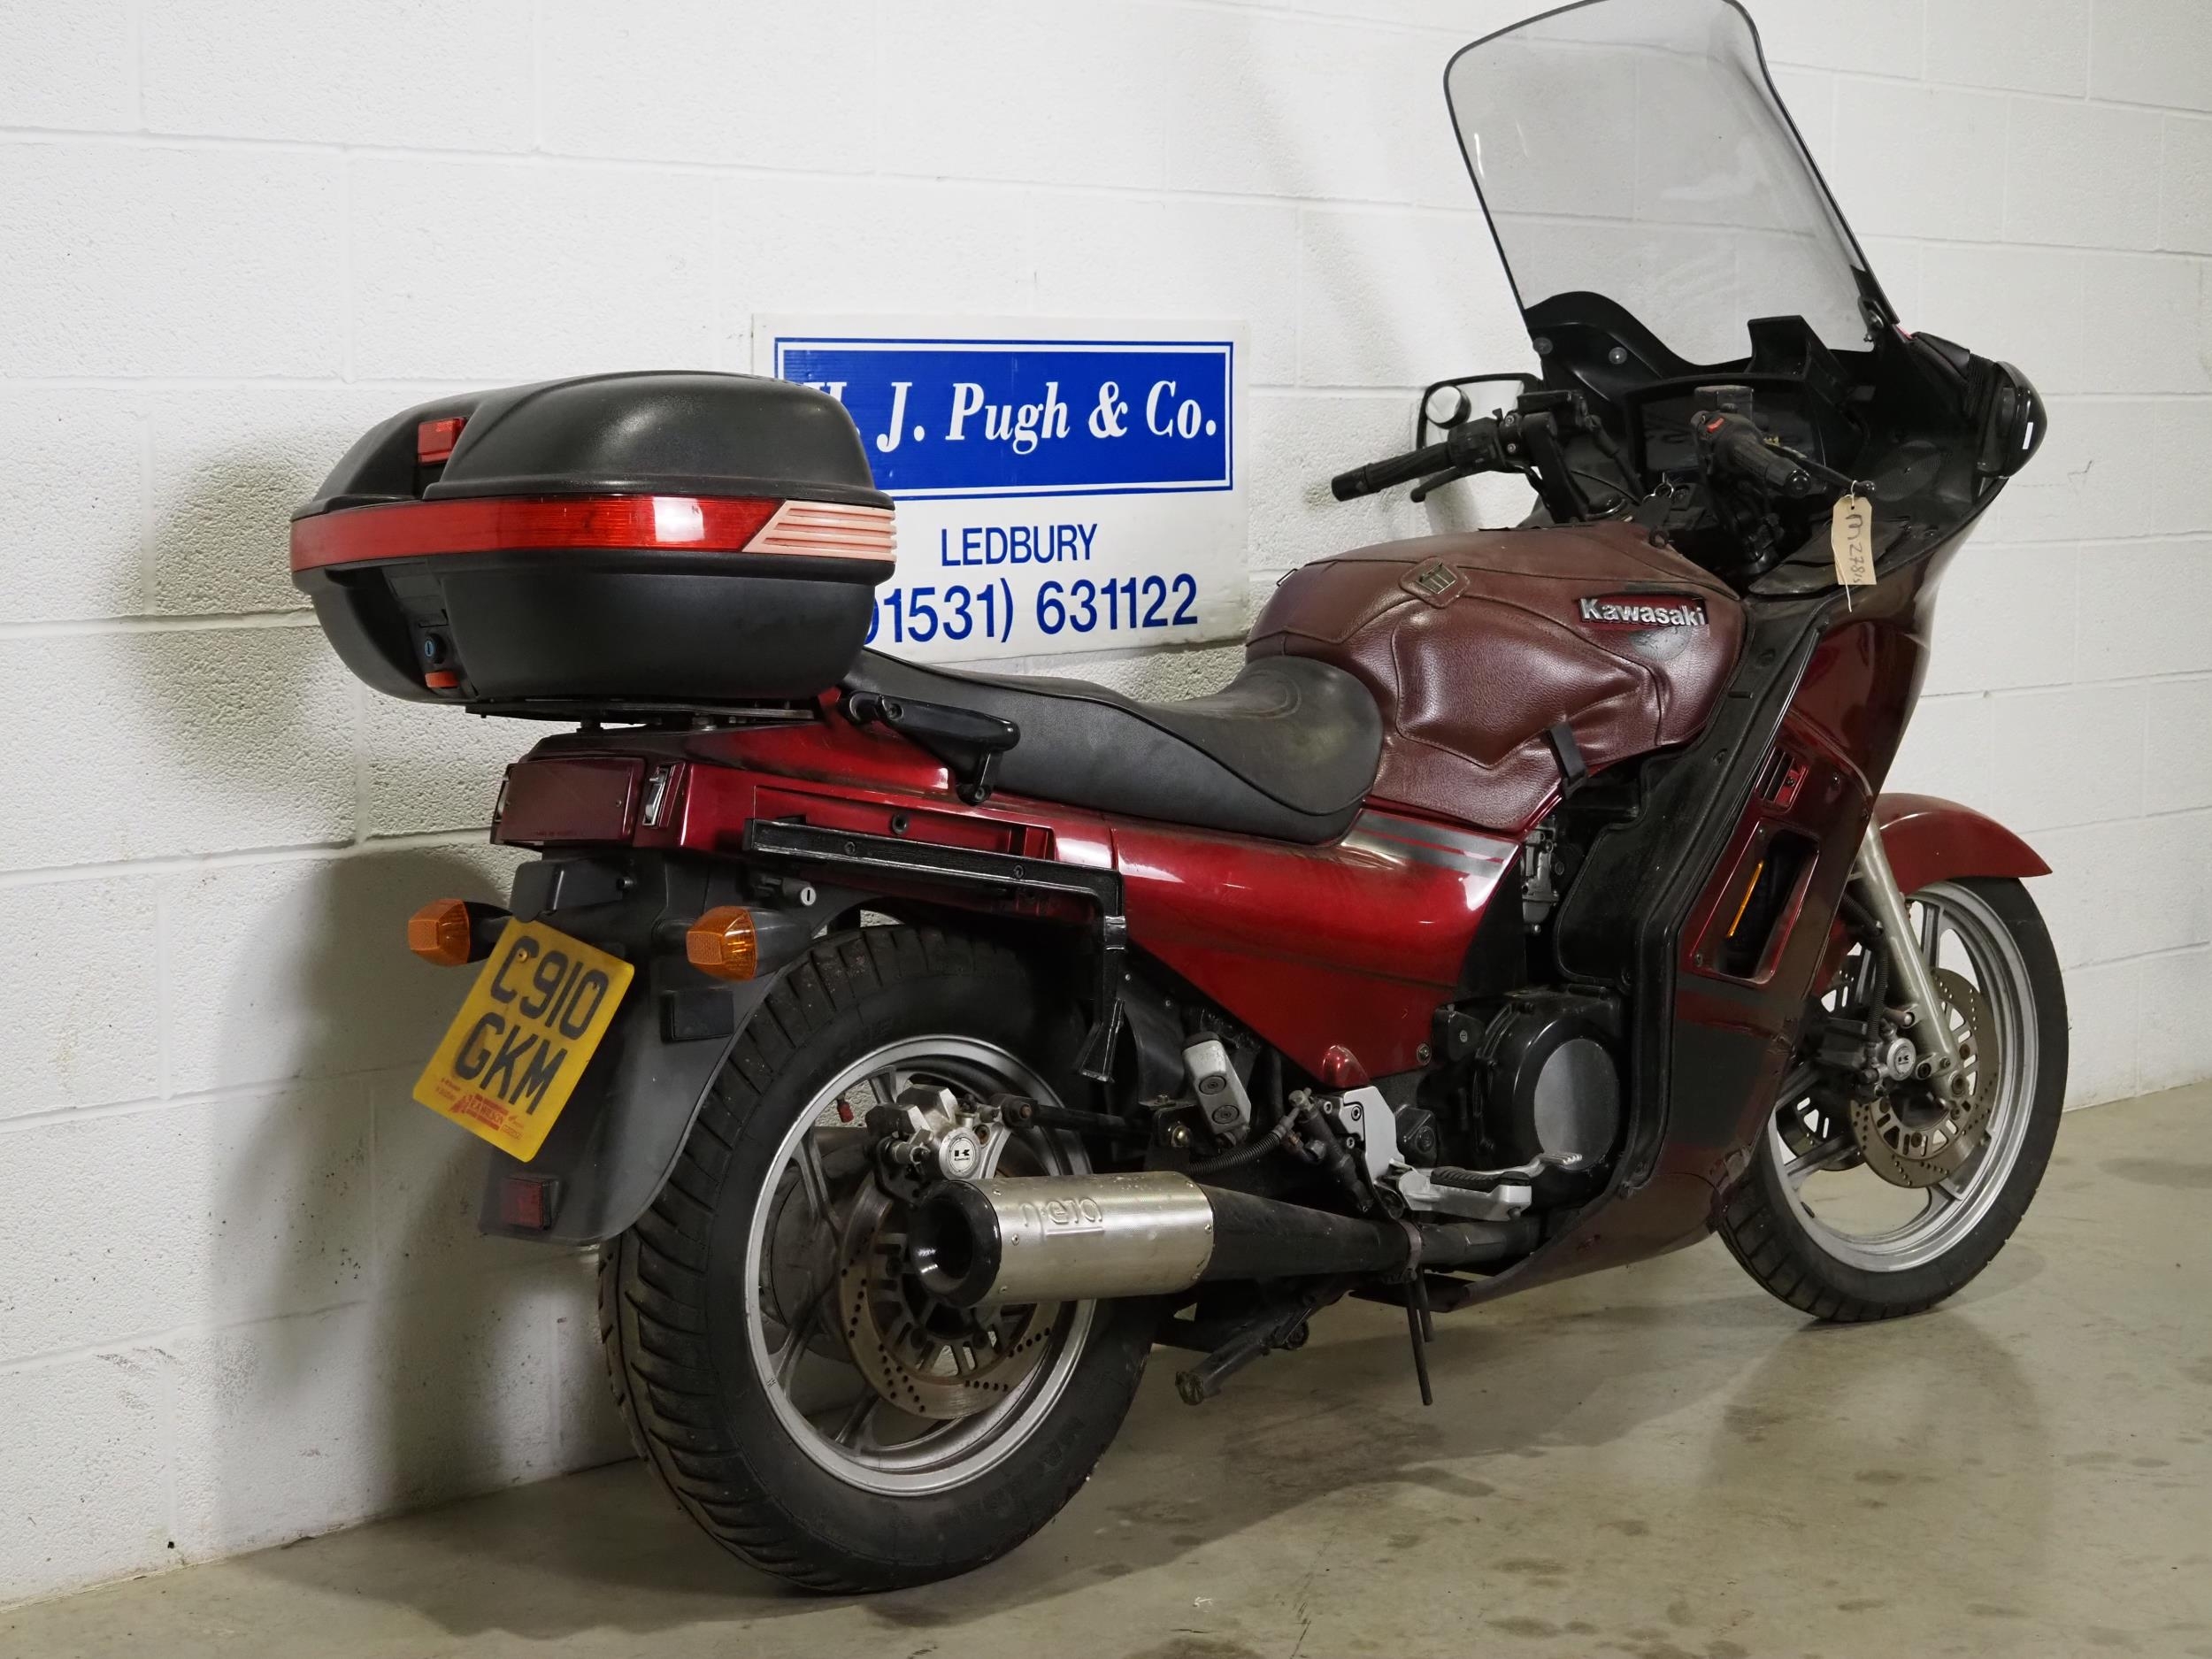 Kawasaki ZG 1000A1 motorcycle. 1986. 997cc. Has been stored for some time so will need - Image 3 of 5